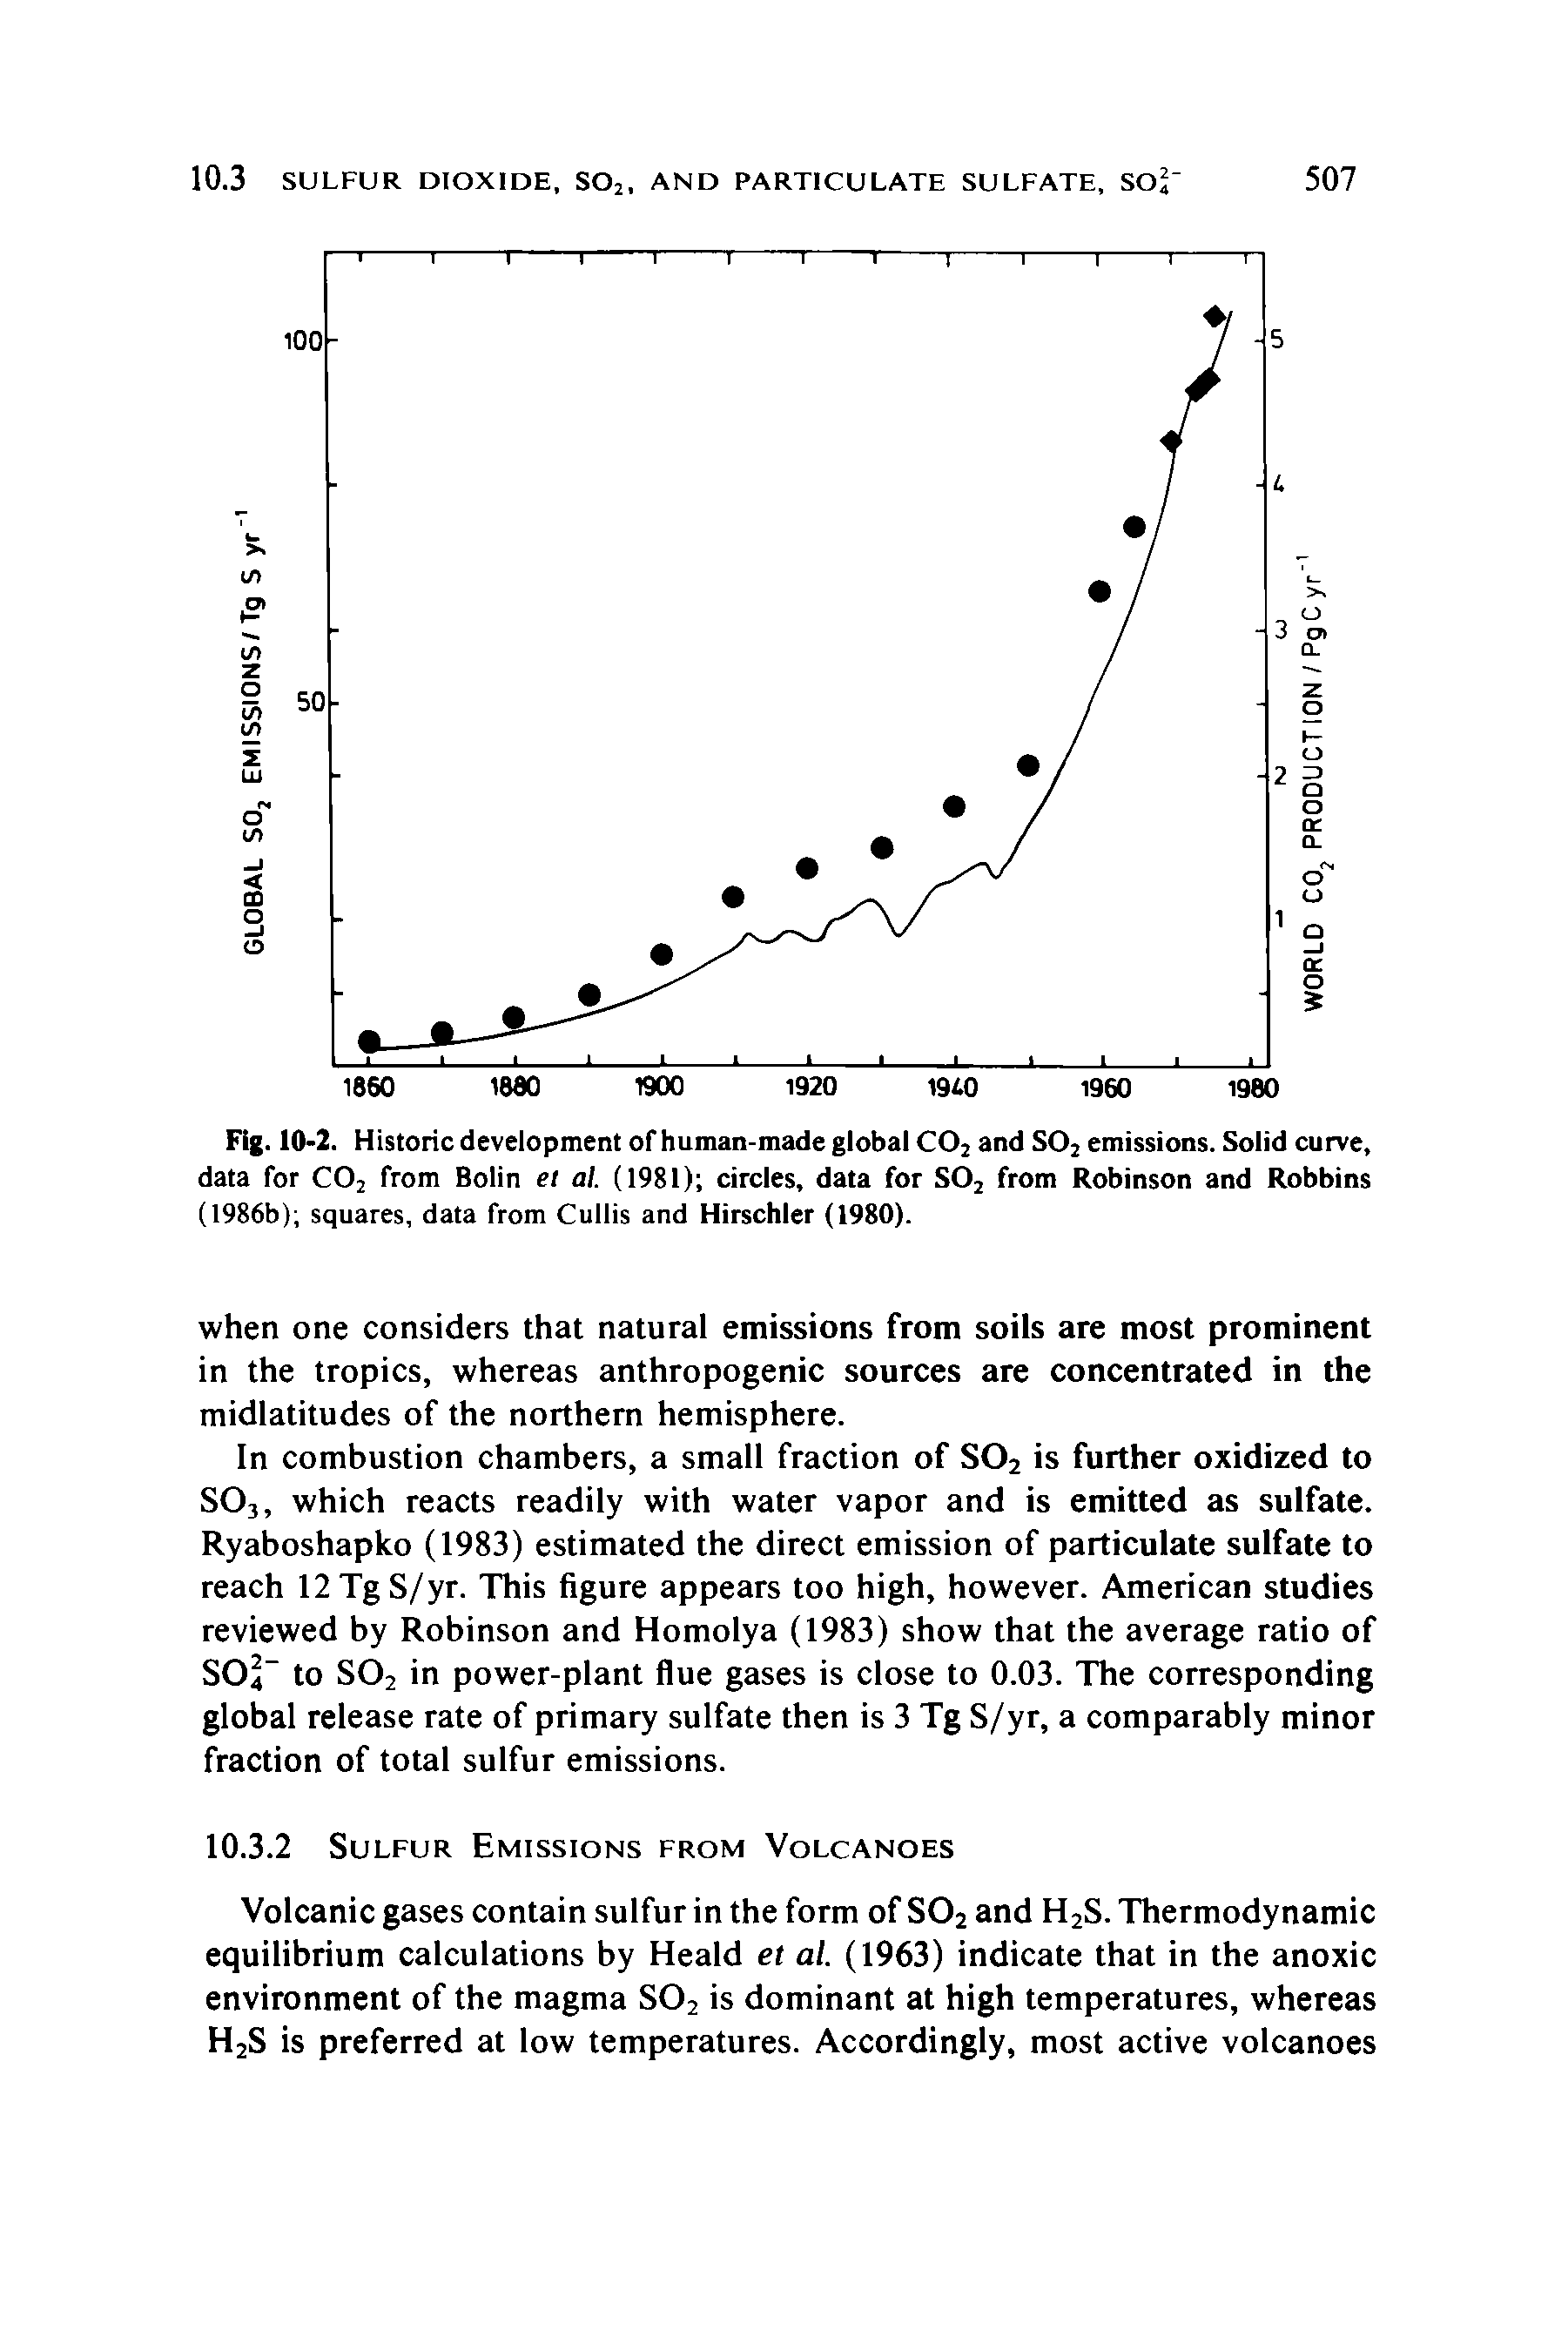 Fig. 10-2. Historic development of human-made global C02 and S02 emissions. Solid curve, data for C02 from Bolin et al. (1981) circles, data for S02 from Robinson and Robbins (1986b) squares, data from Cullis and Hirschler (1980).